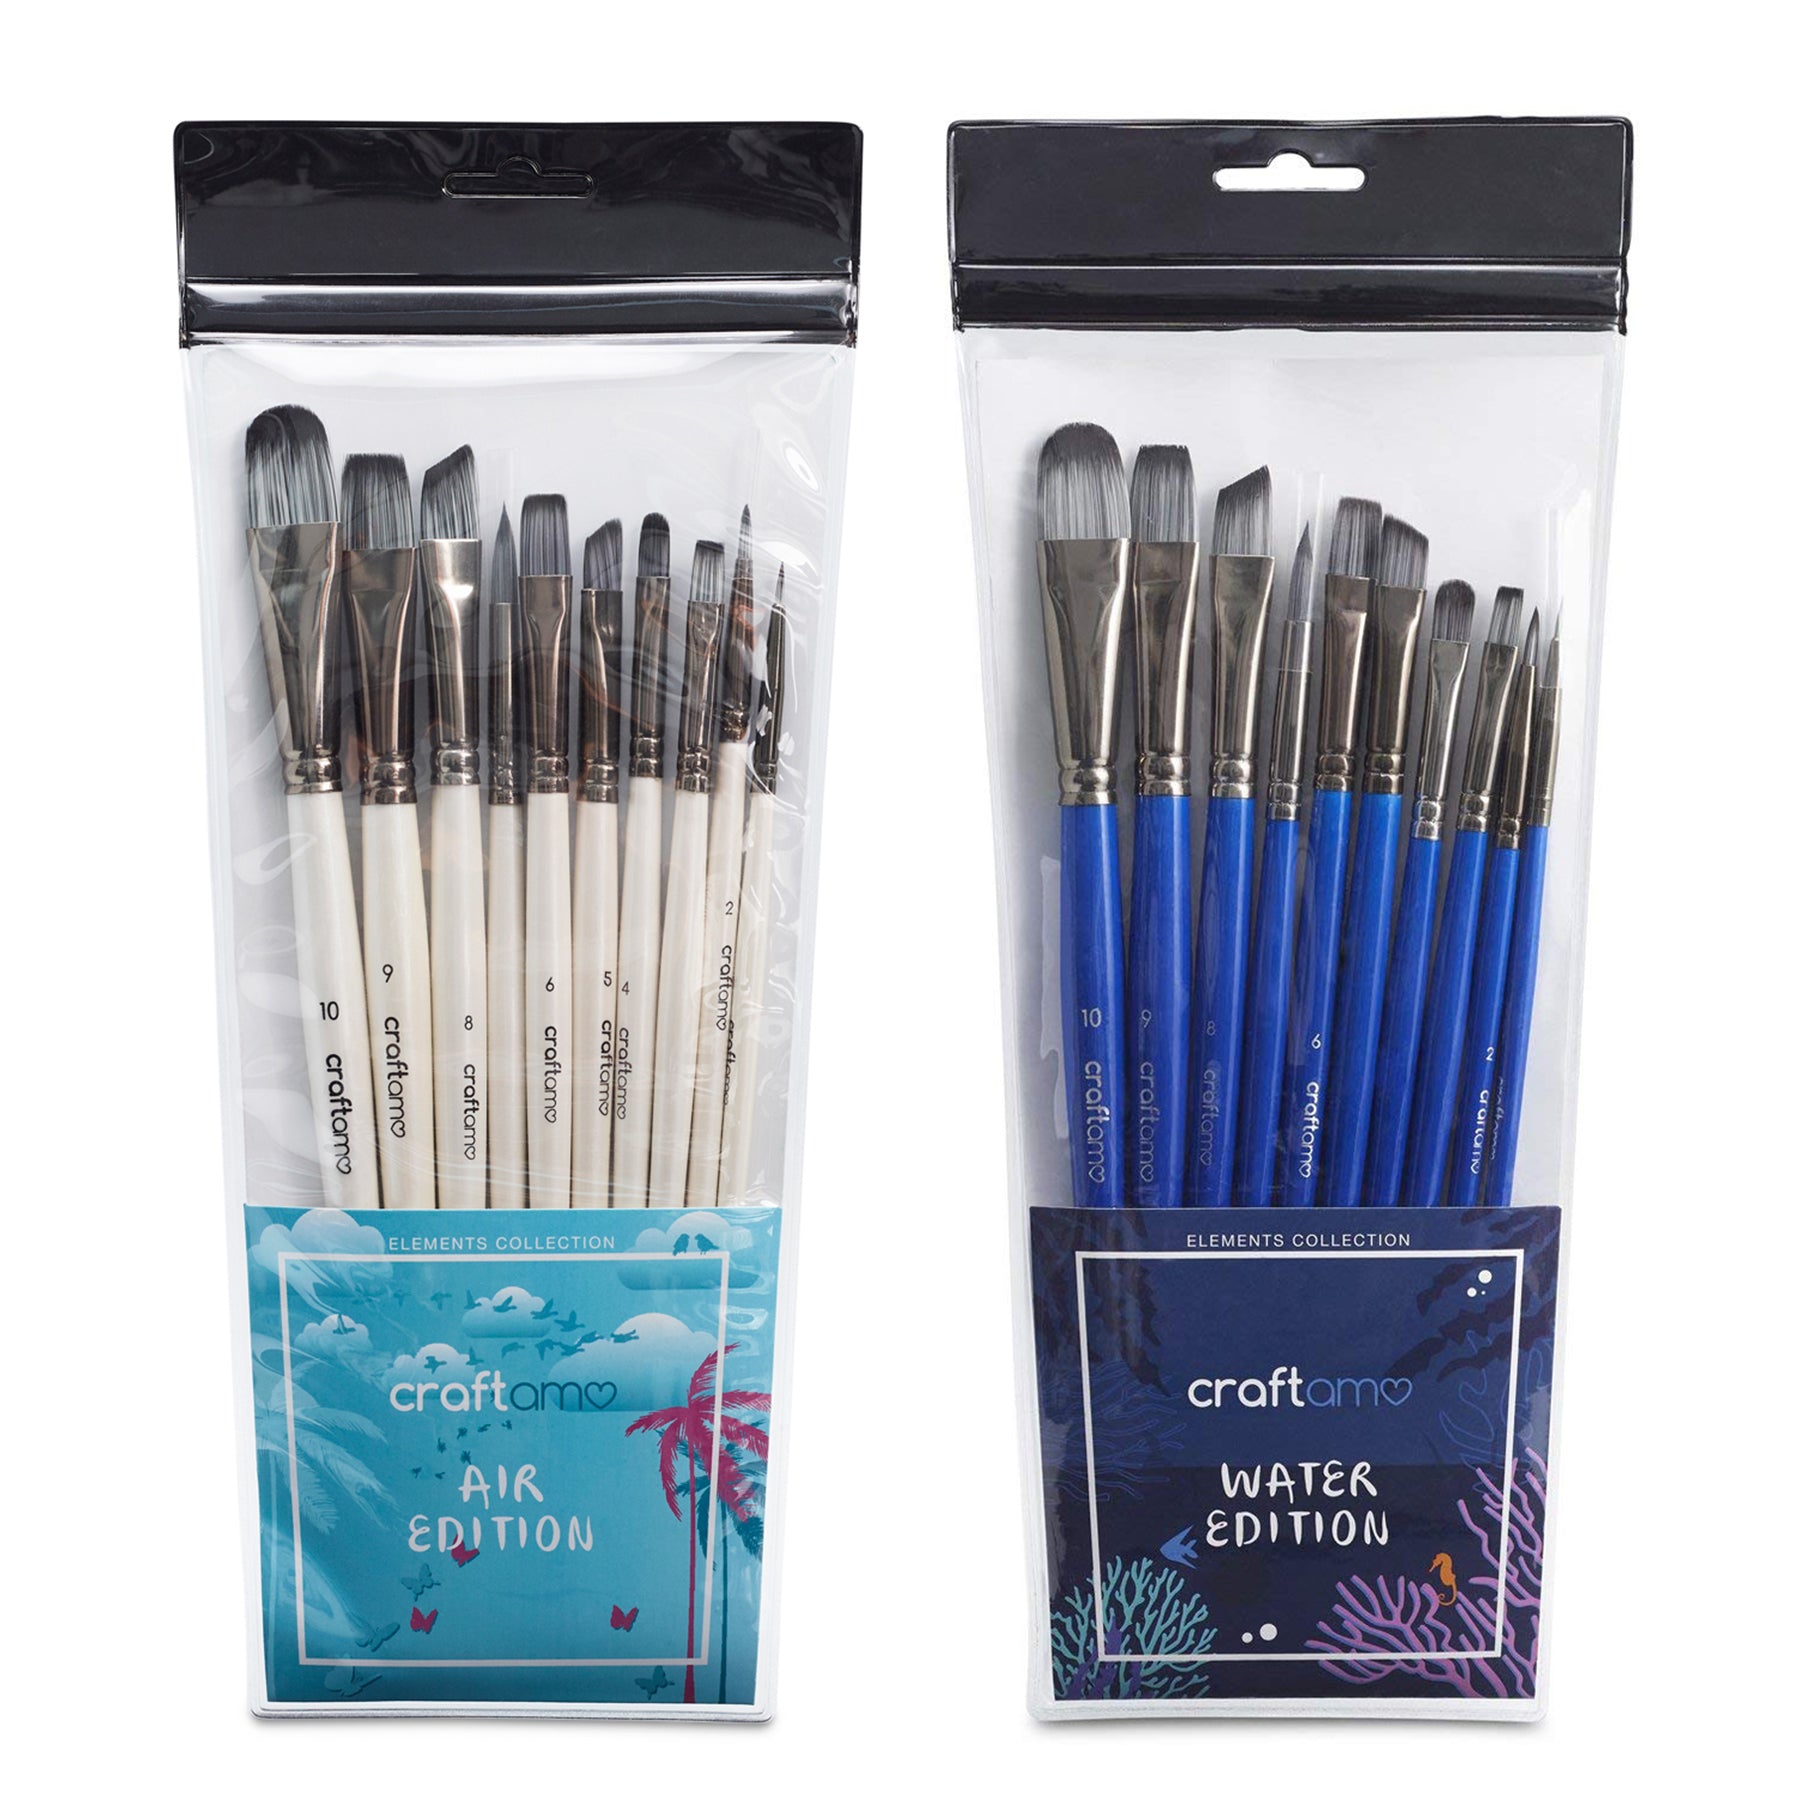 CRAFTAMO Brushes - Paint Brush Set for Watercolor, Acrylic, Oil